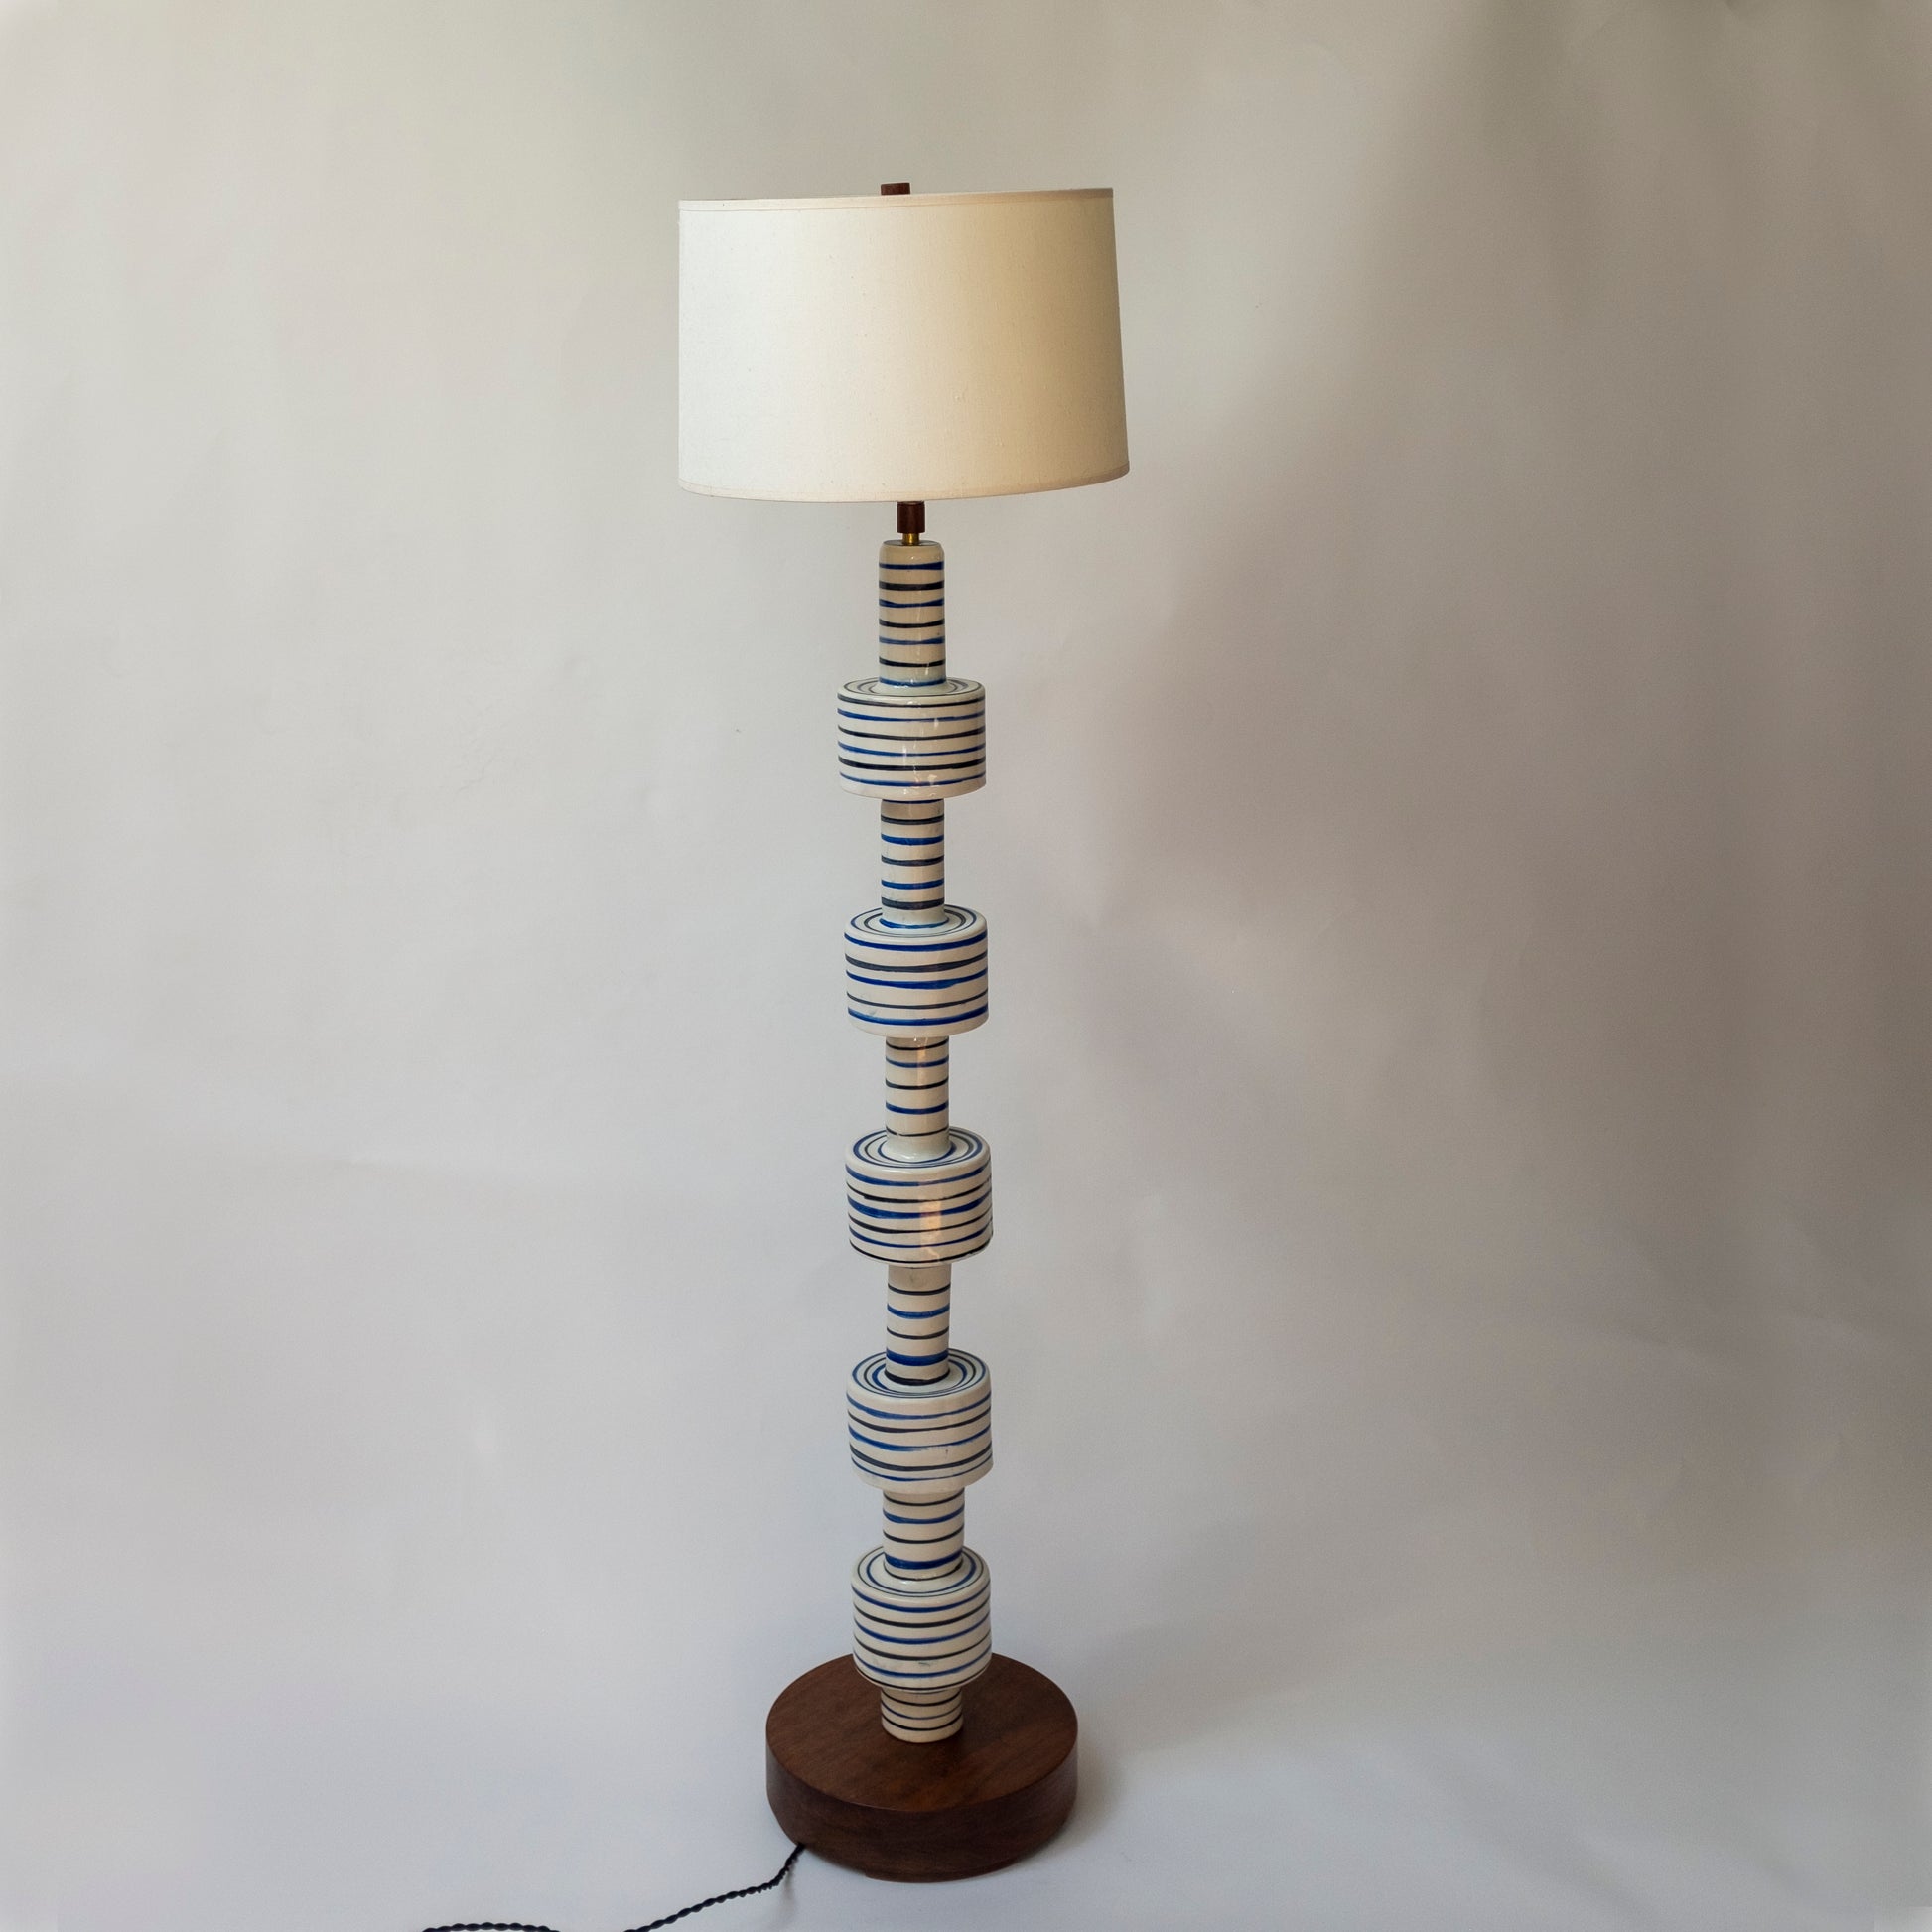 Striped White, Blue, and Black Floor Lamp.  Handmade with a solid walnut base.